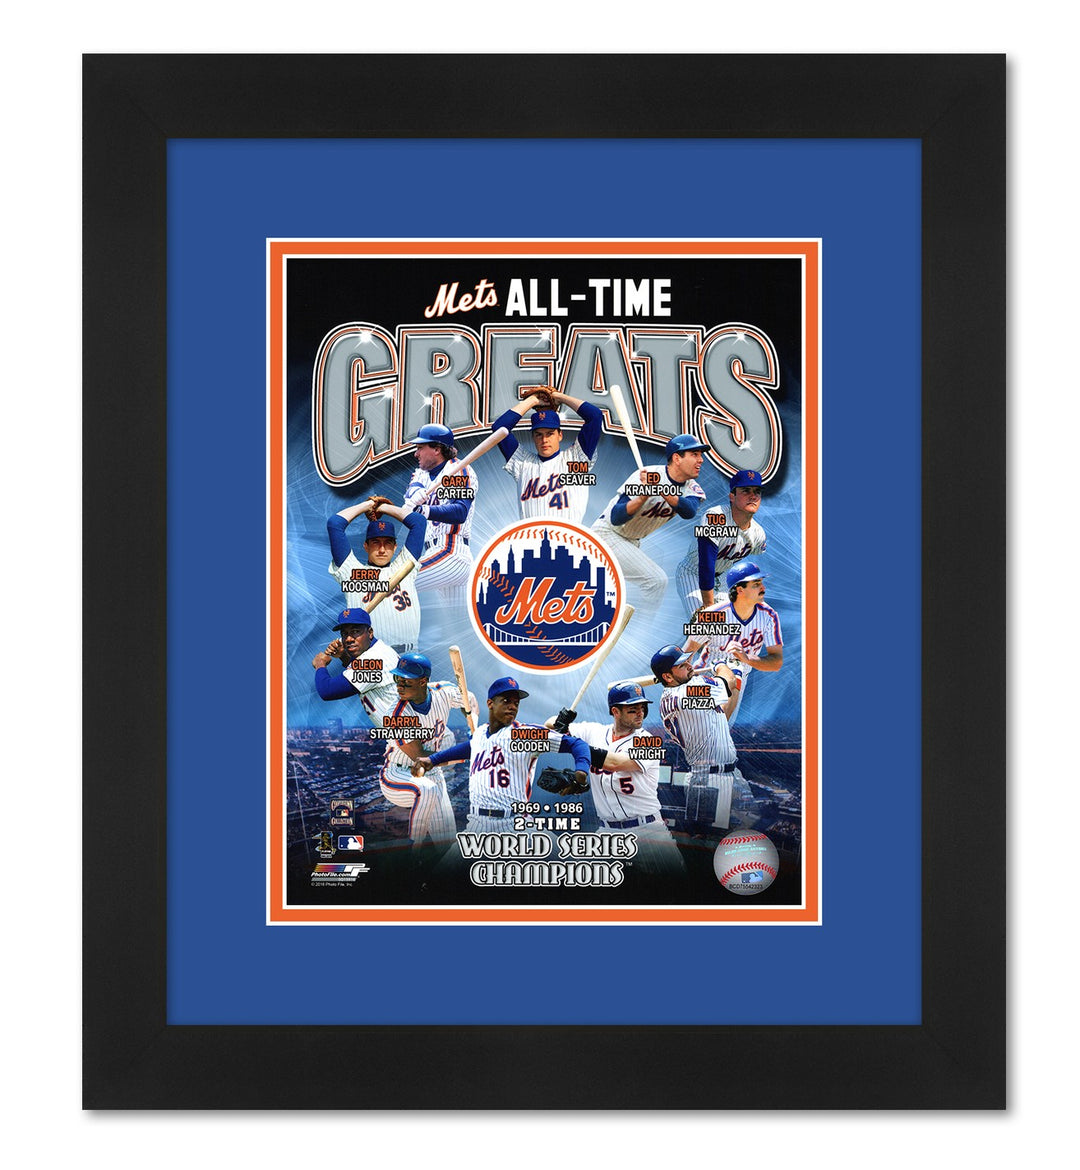 New York Mets All-Time Greats Team Collage 13x16 Professionally Framed and Matted with Matching Team Colors